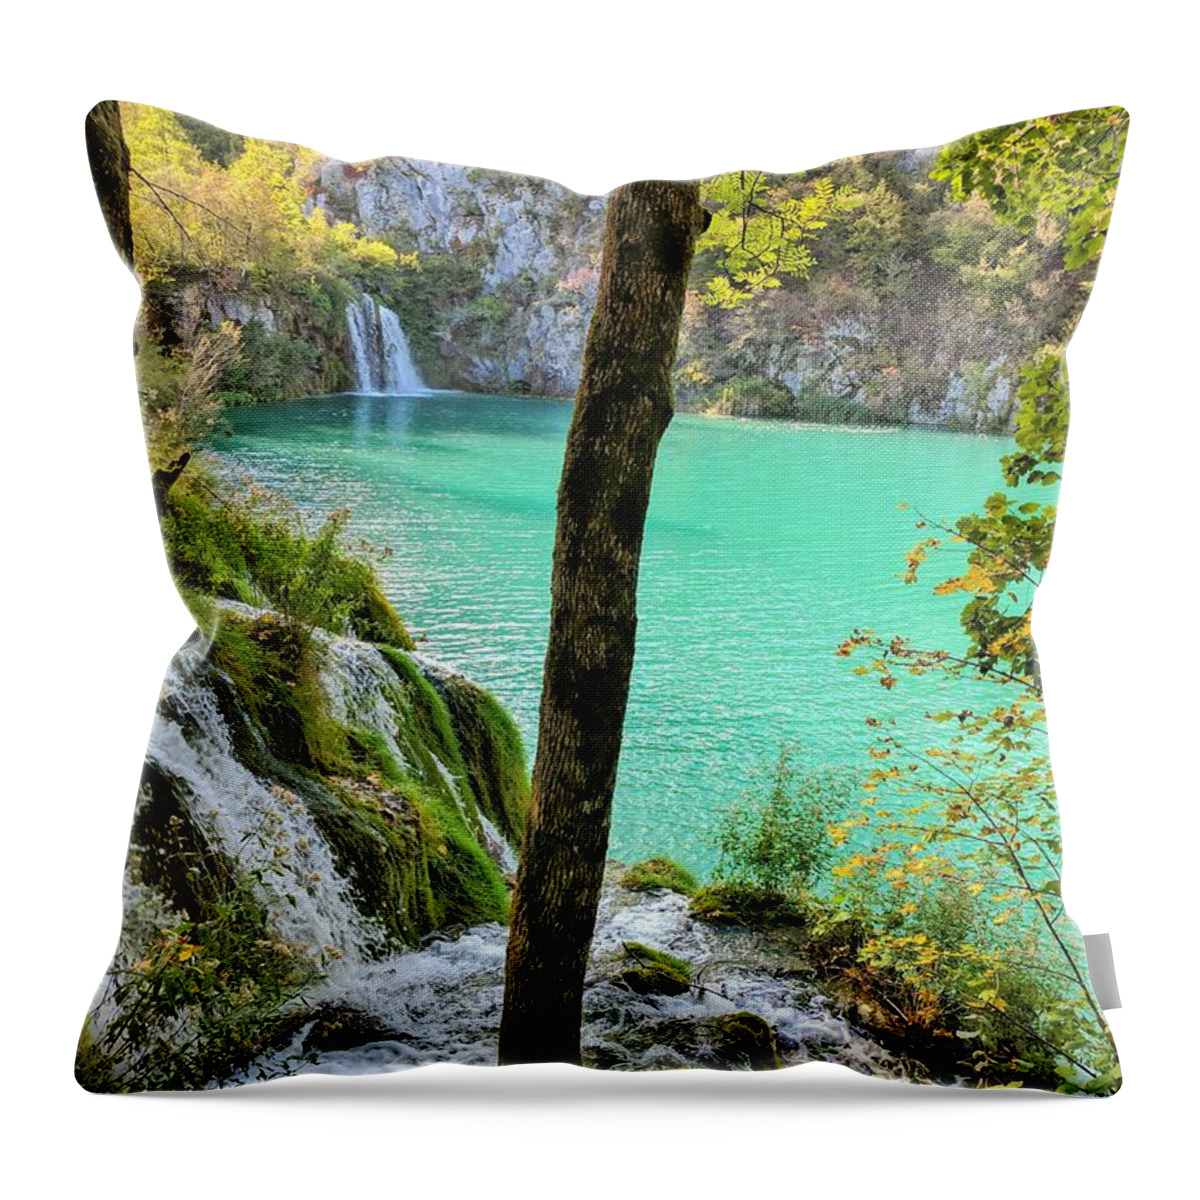 Plitvice Lakes Throw Pillow featuring the photograph Turquoise Beauty In The Woods by Yvonne Jasinski